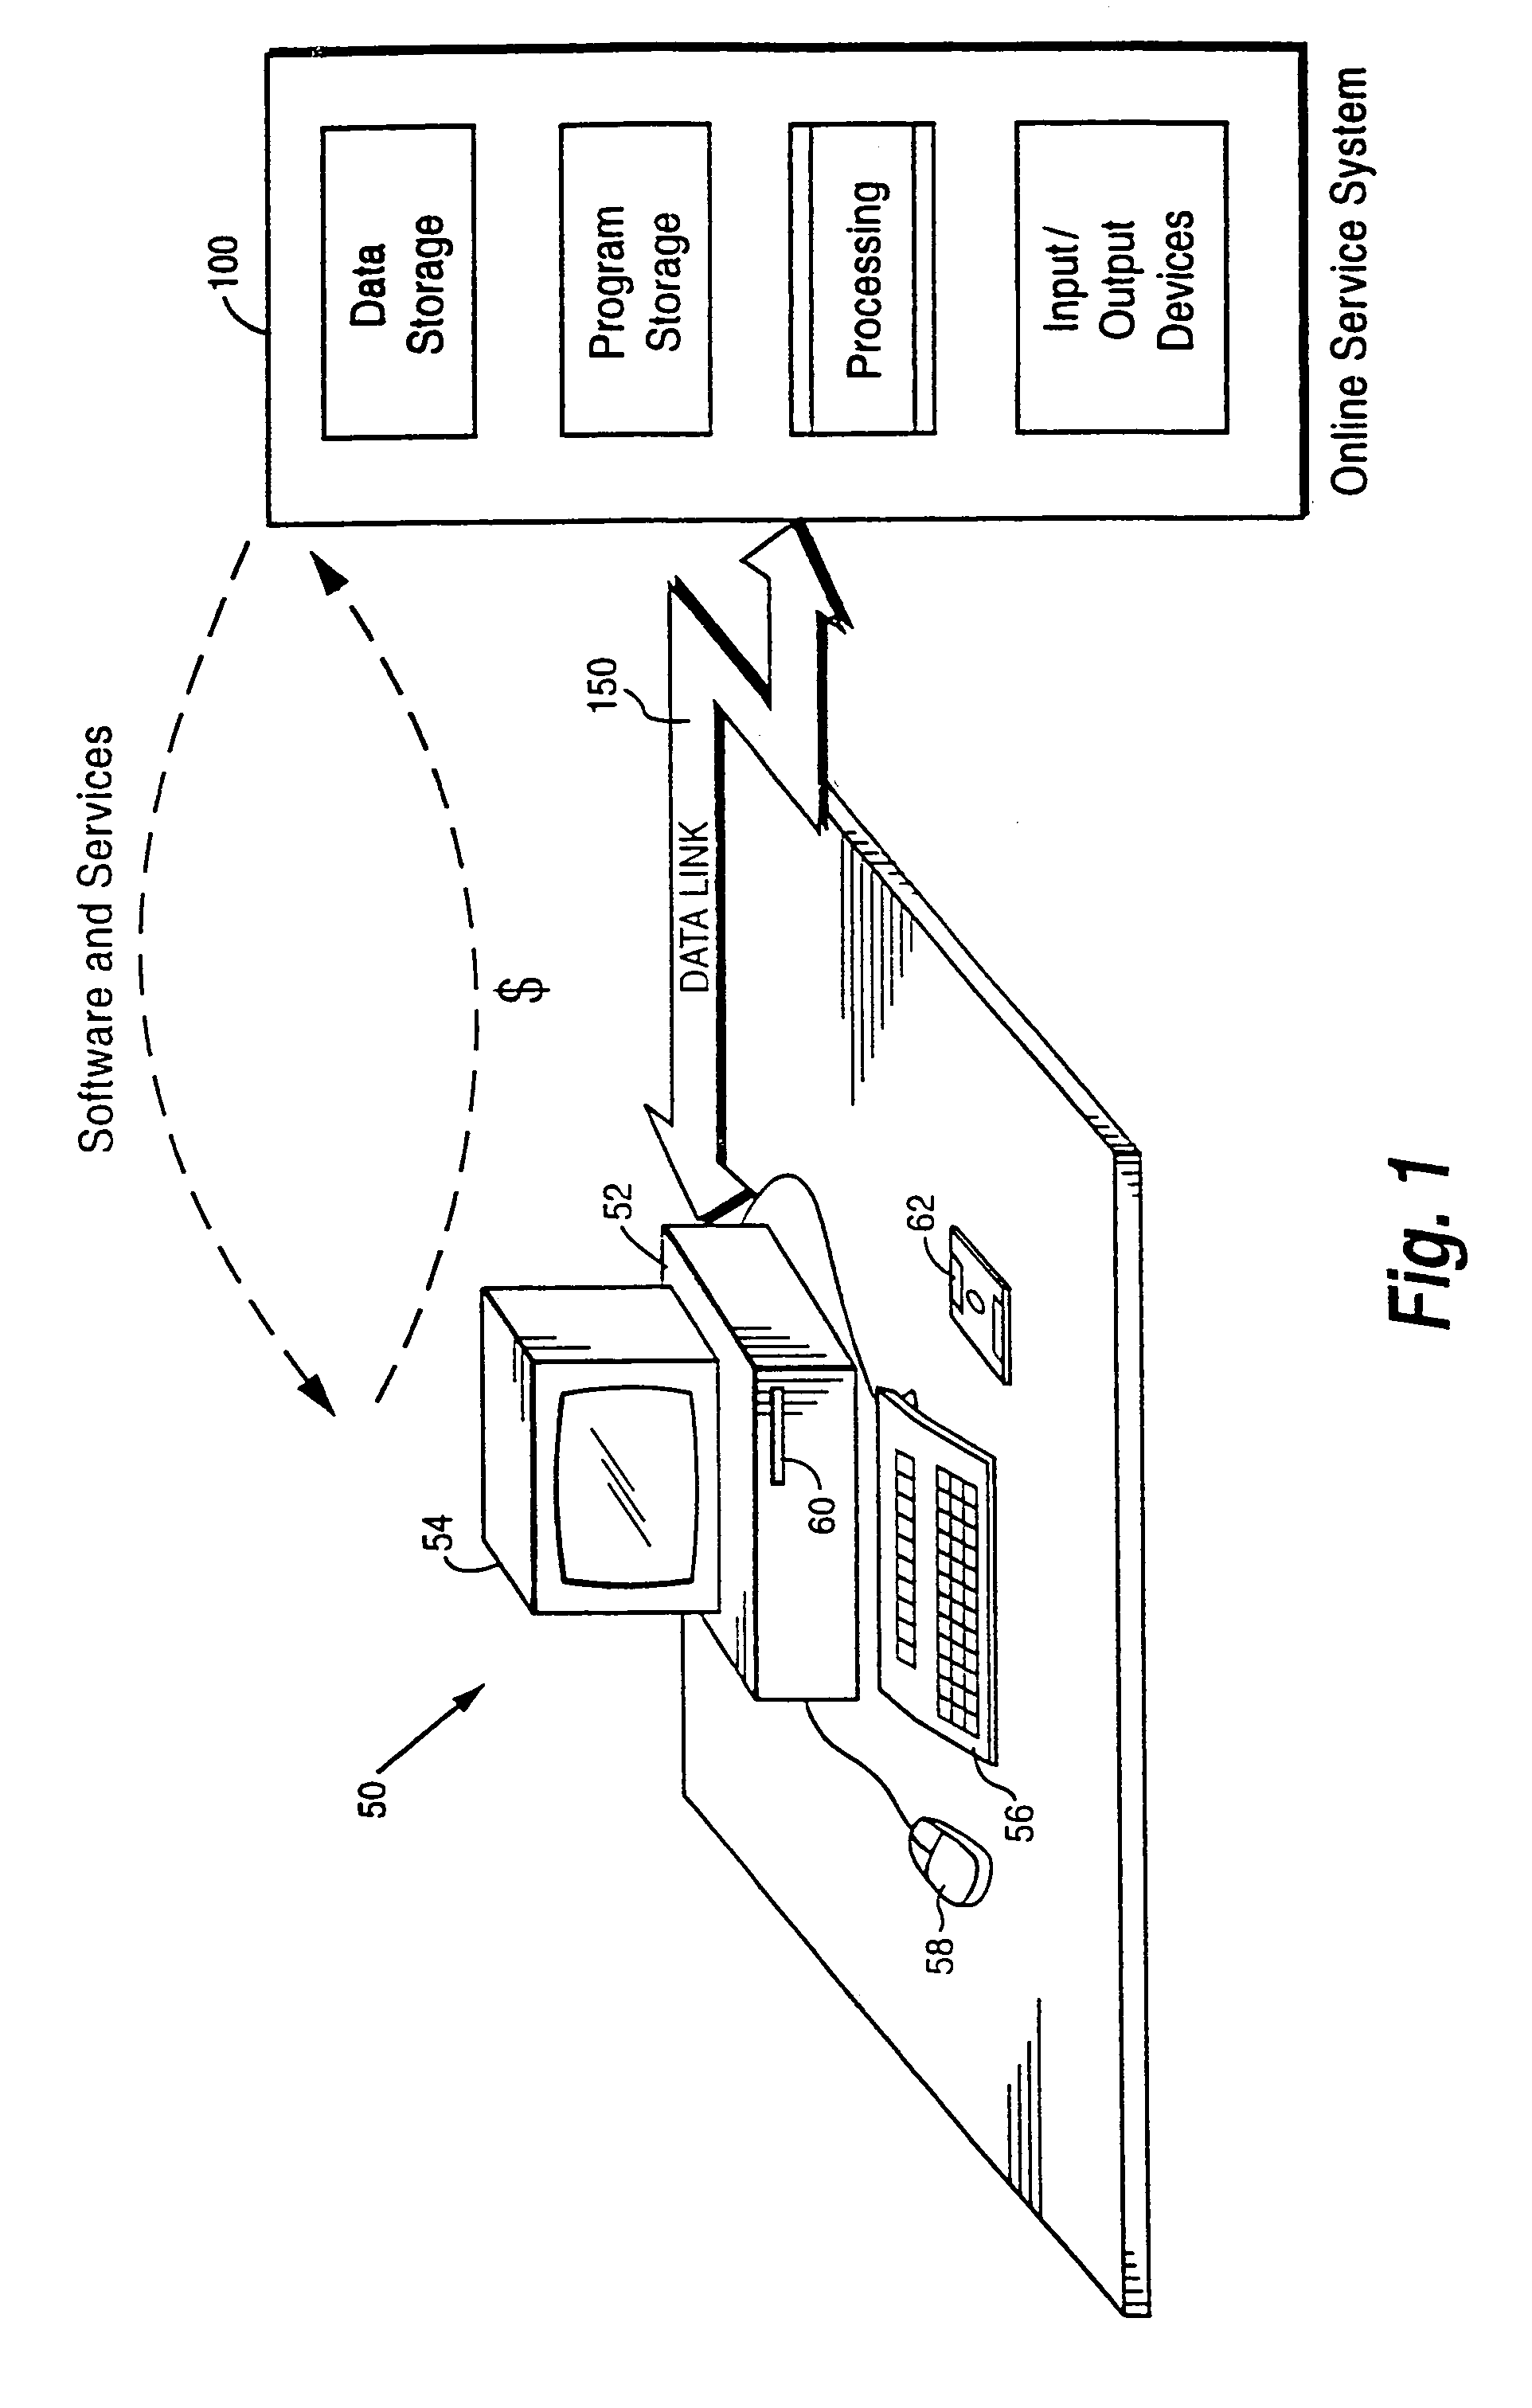 Internet download systems and methods providing software to internet computer users for local execution